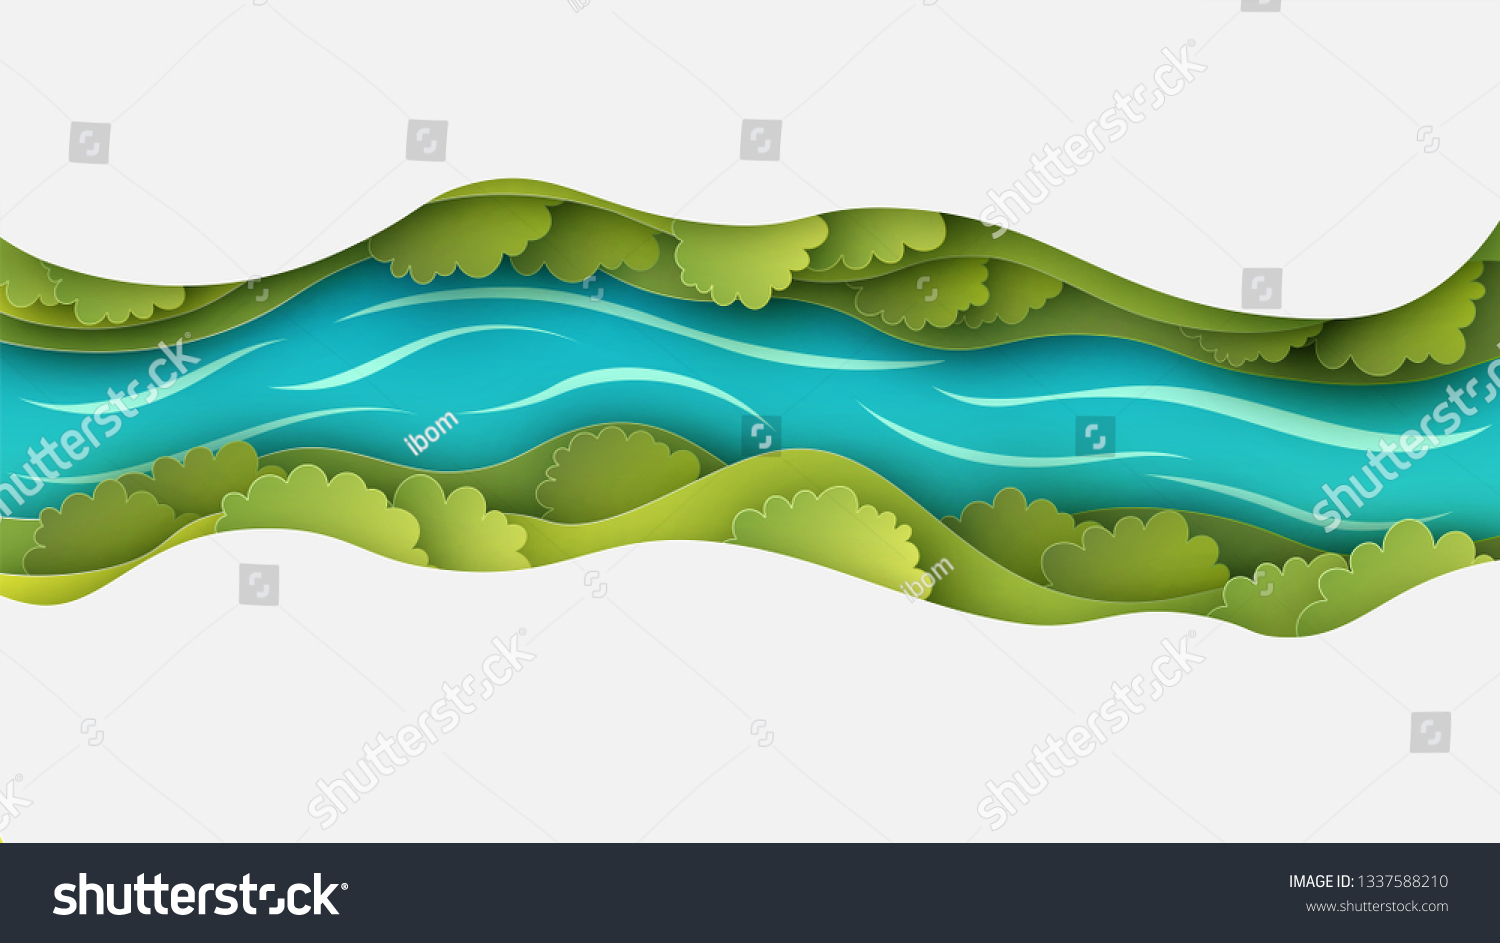 Paper layer cut of top view landscape in forest with trees, river, cloud and narrow valley. Landscape design on paper art. paper cut and craft style. vector, illustration.